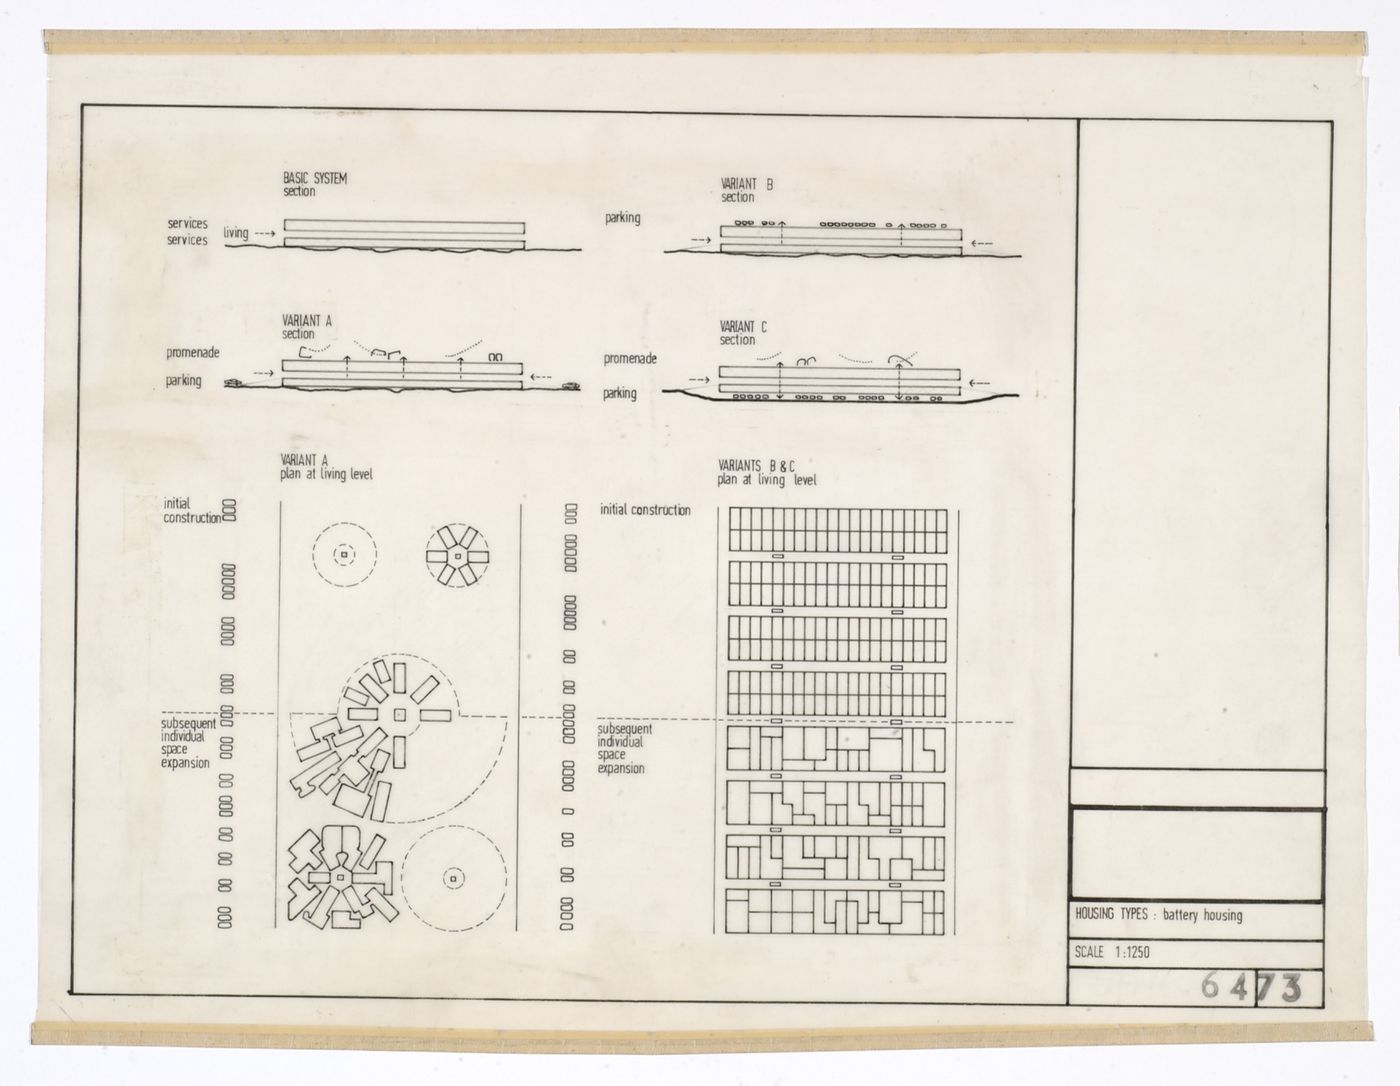 Diagrammatic elevations and plans of battery housing, Potteries Thinkbelt